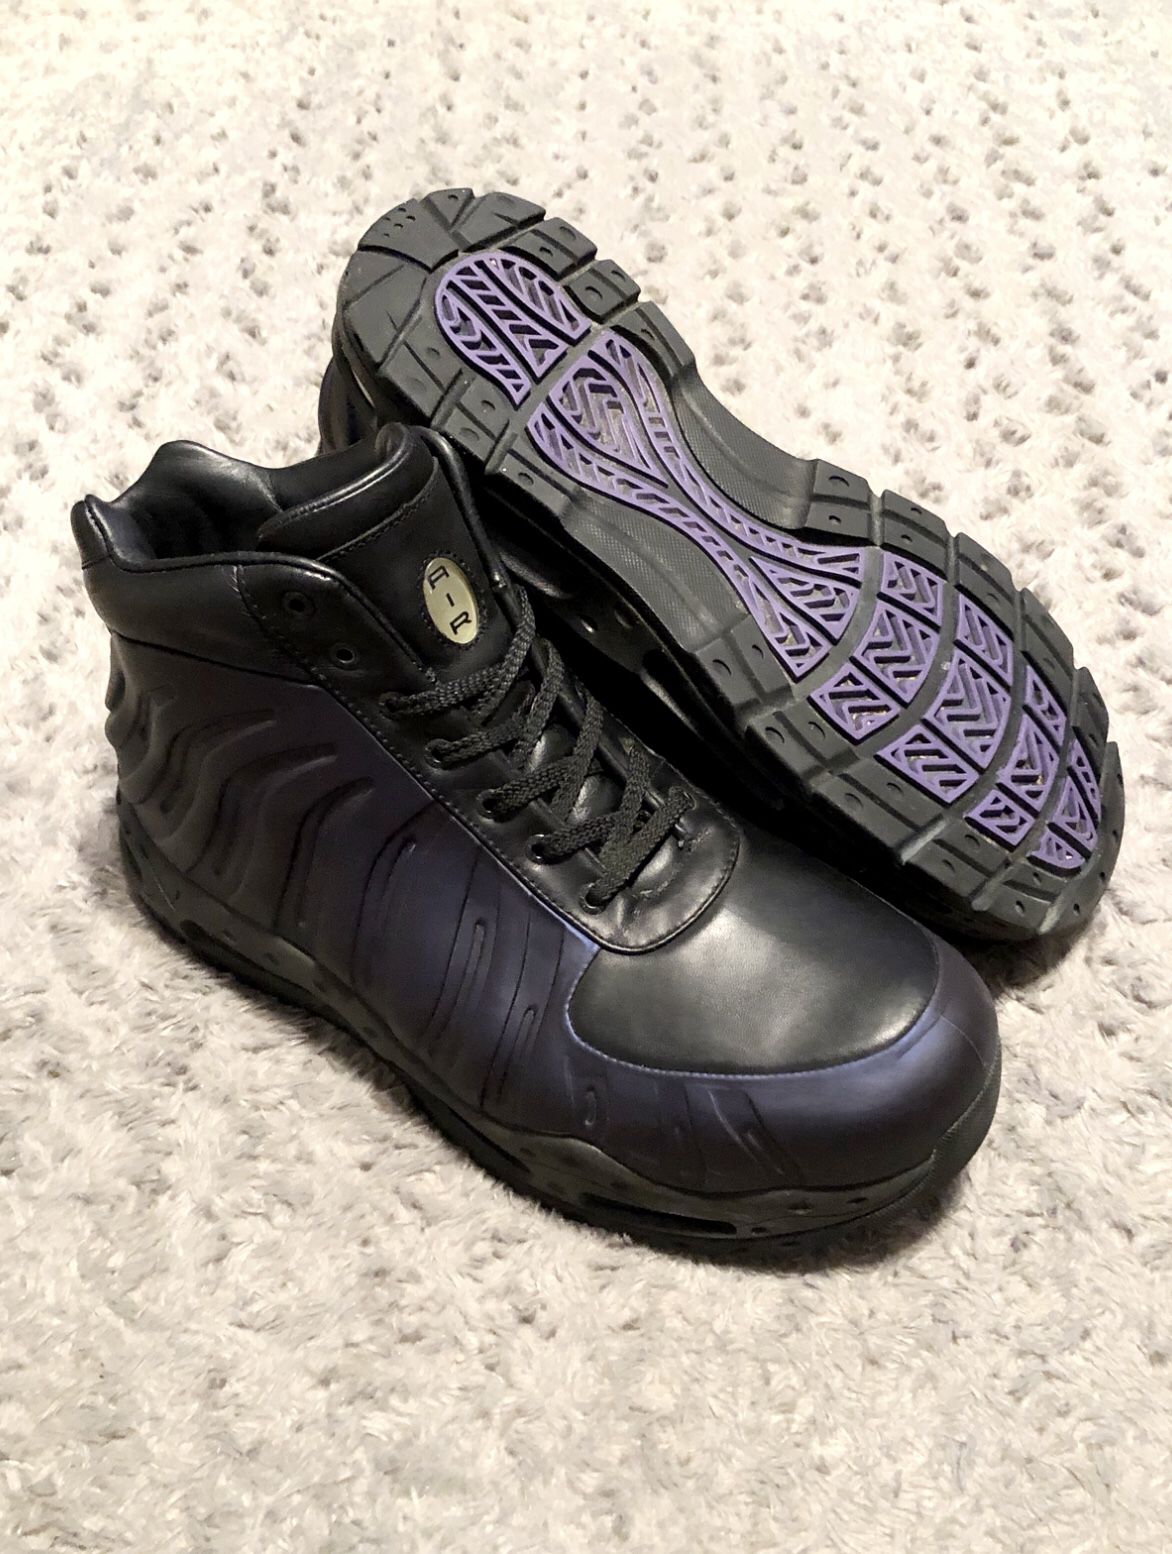 Men’s Nike Air Max ACG paid $280 Size 12 Like new condition. Color: Varsity Purple Black-Black Egg plant. Foam Dome sneaker/boots. Style # 333791